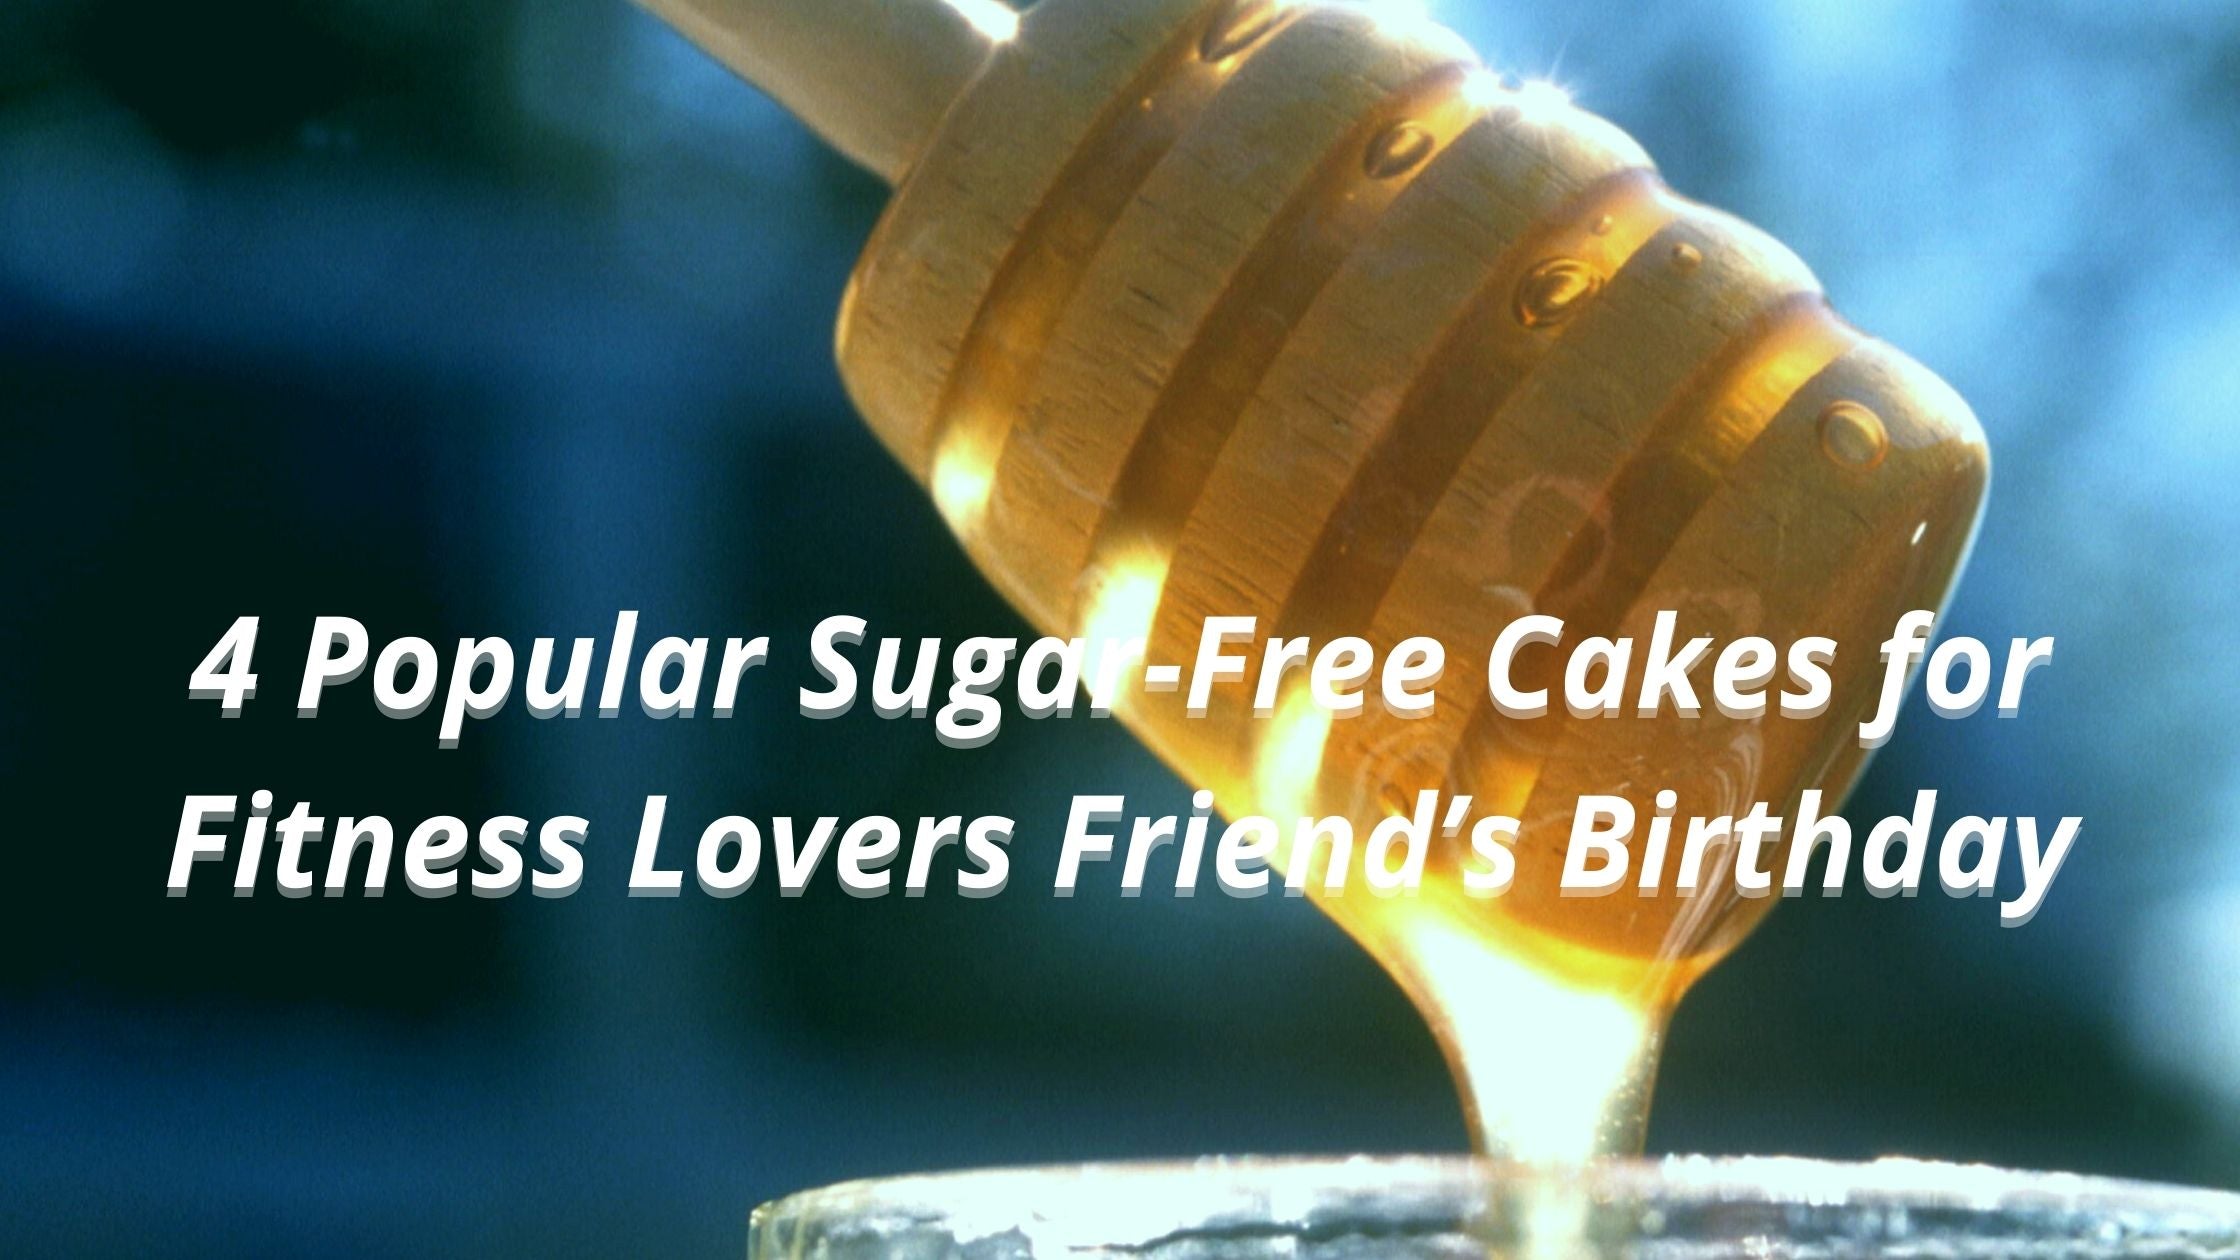 4 Popular Sugar-Free Cakes for Fitness Lovers Friend’s Birthday